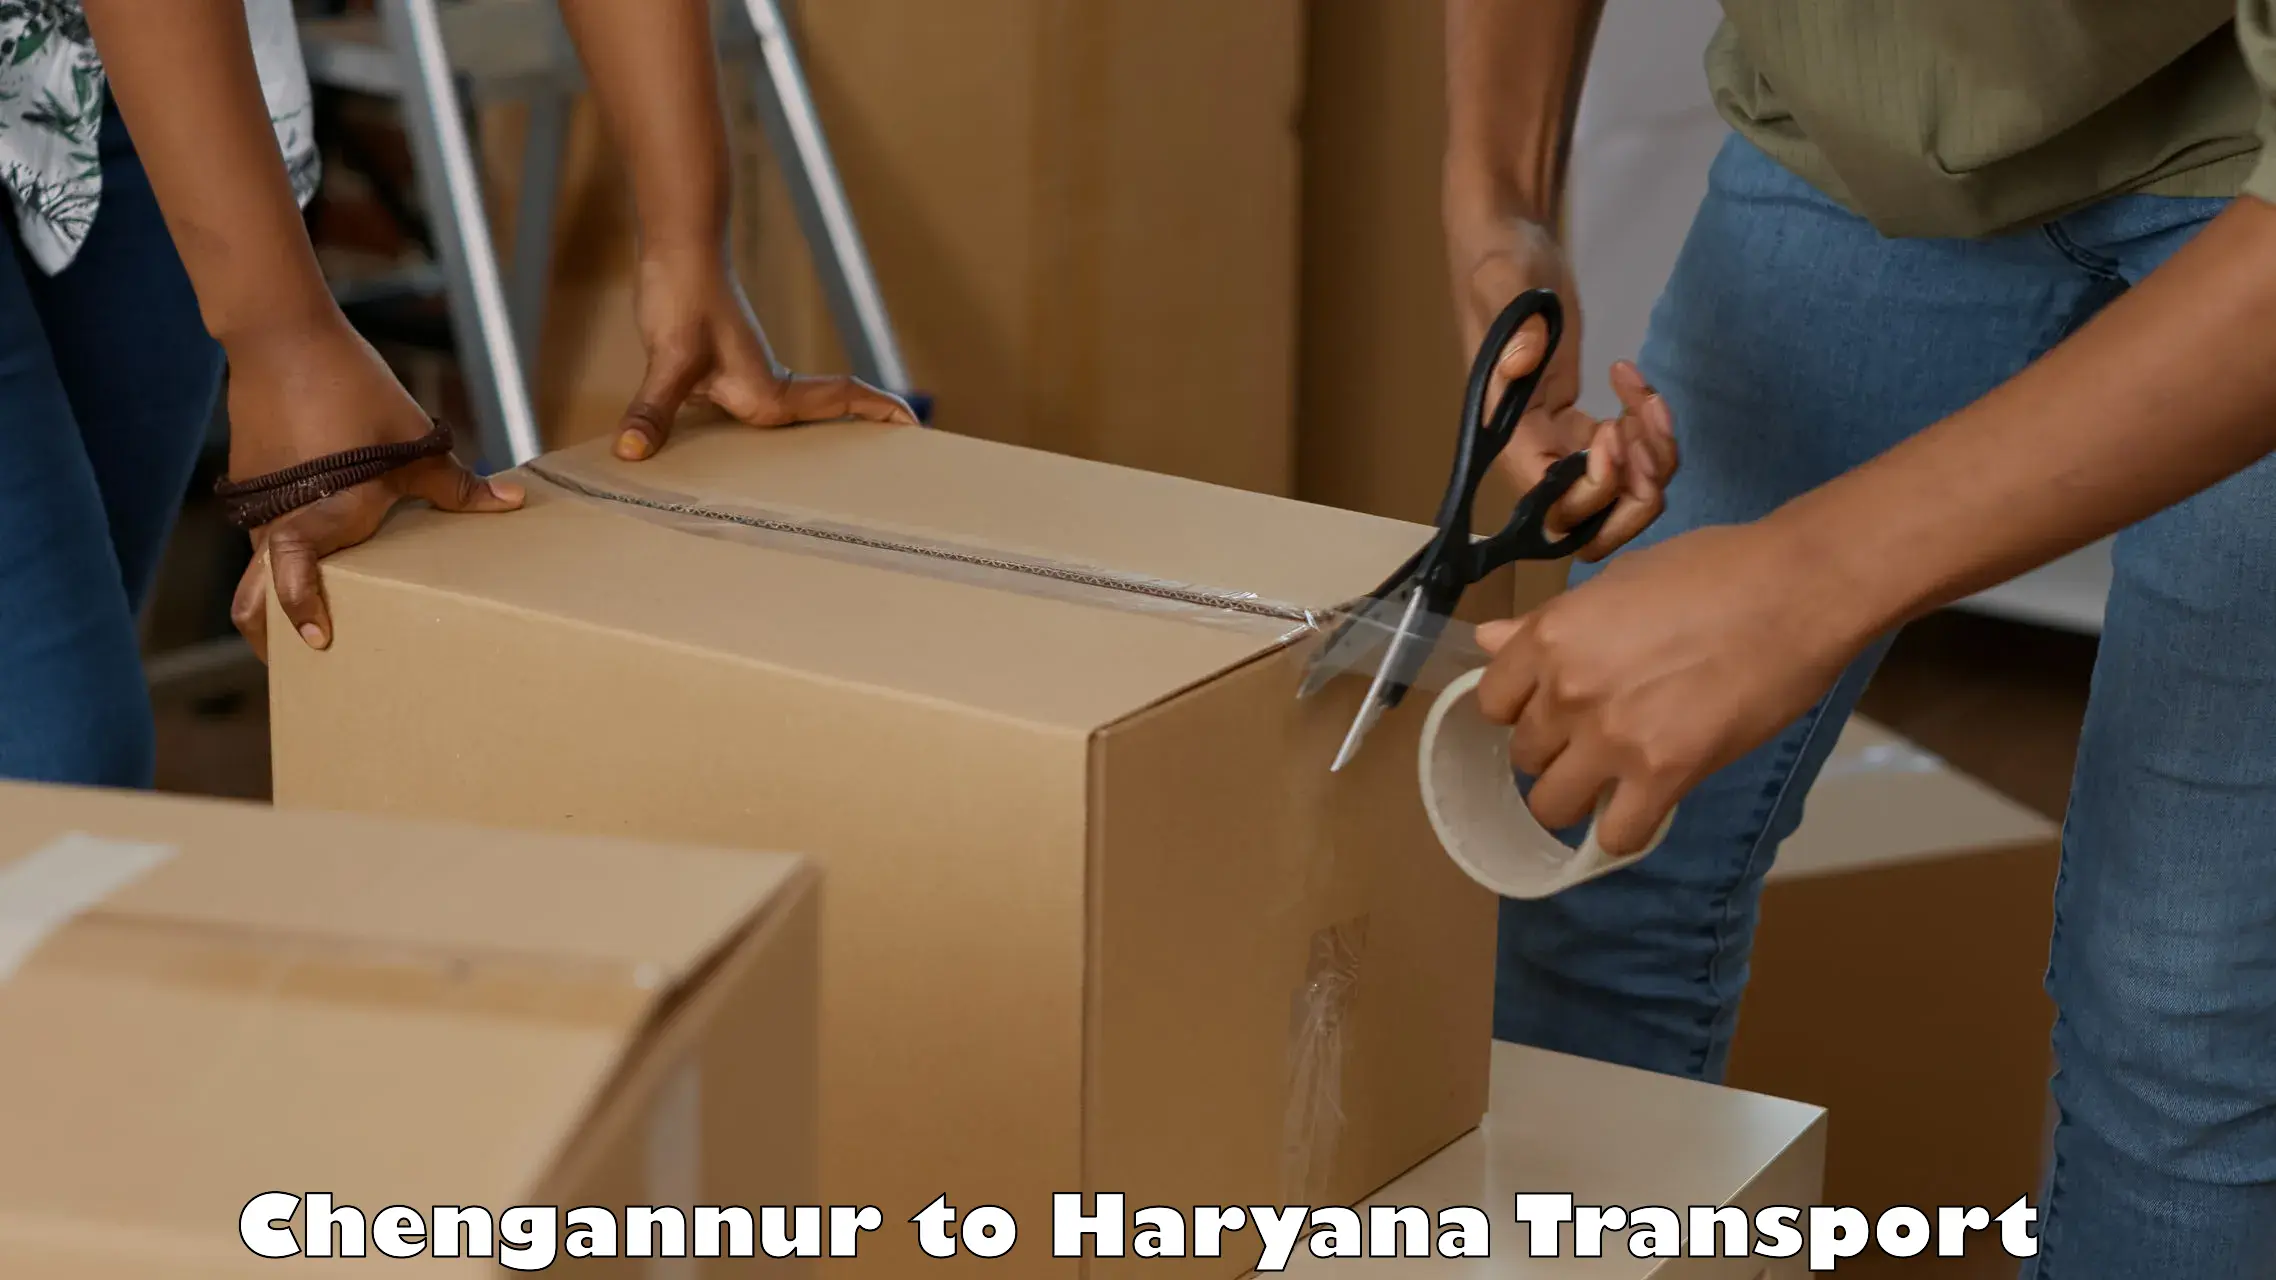 Delivery service Chengannur to Haryana